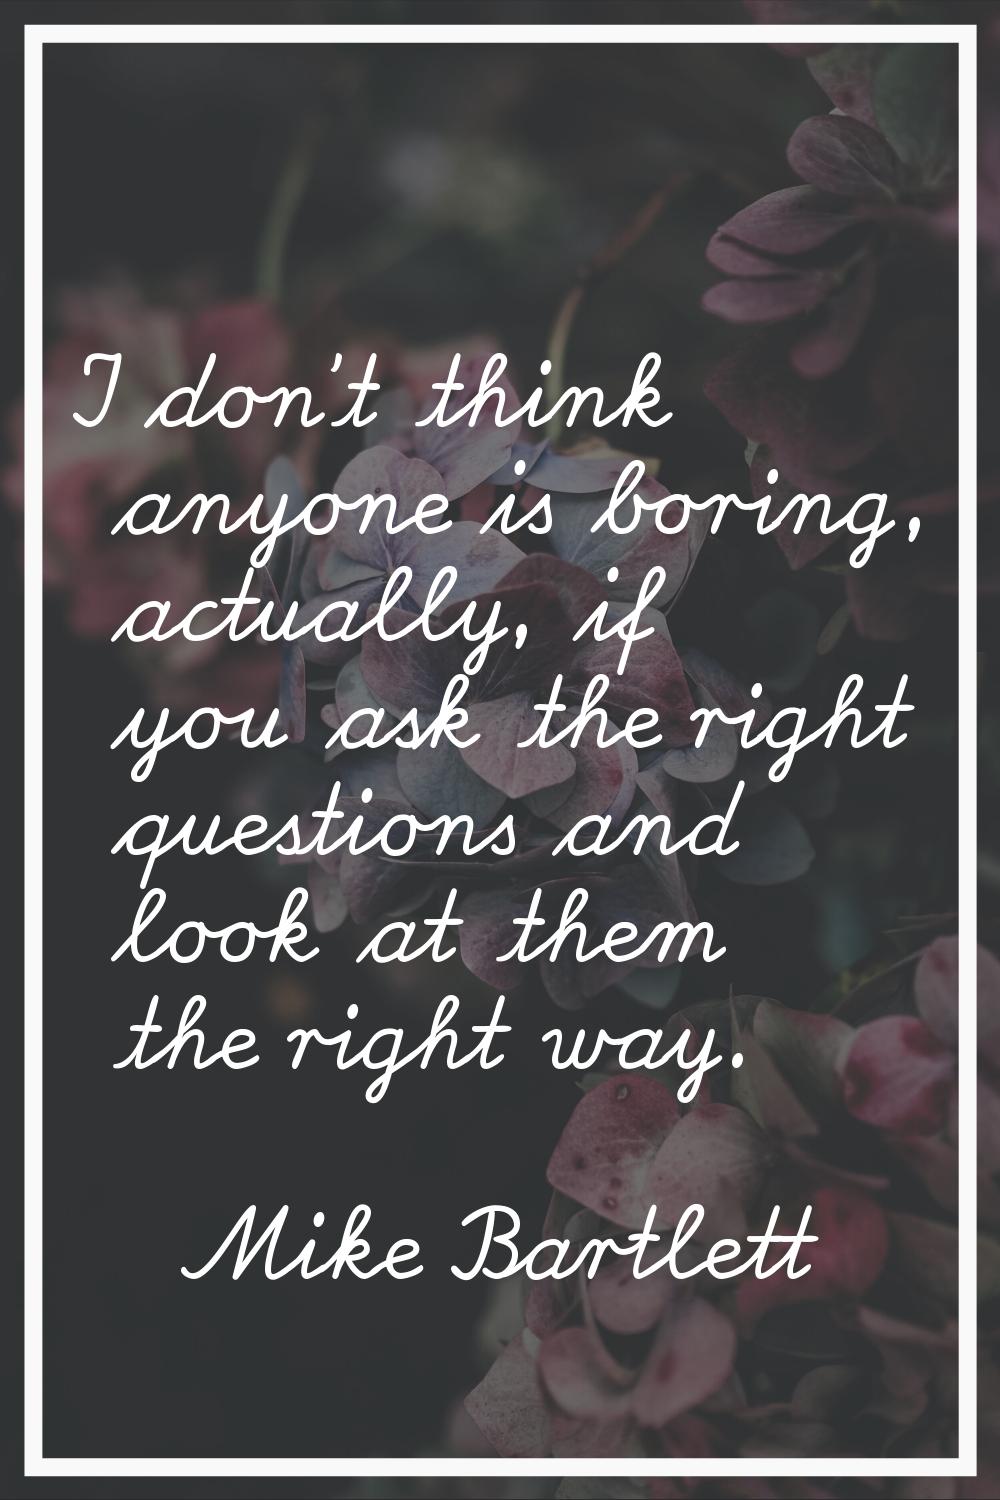 I don't think anyone is boring, actually, if you ask the right questions and look at them the right